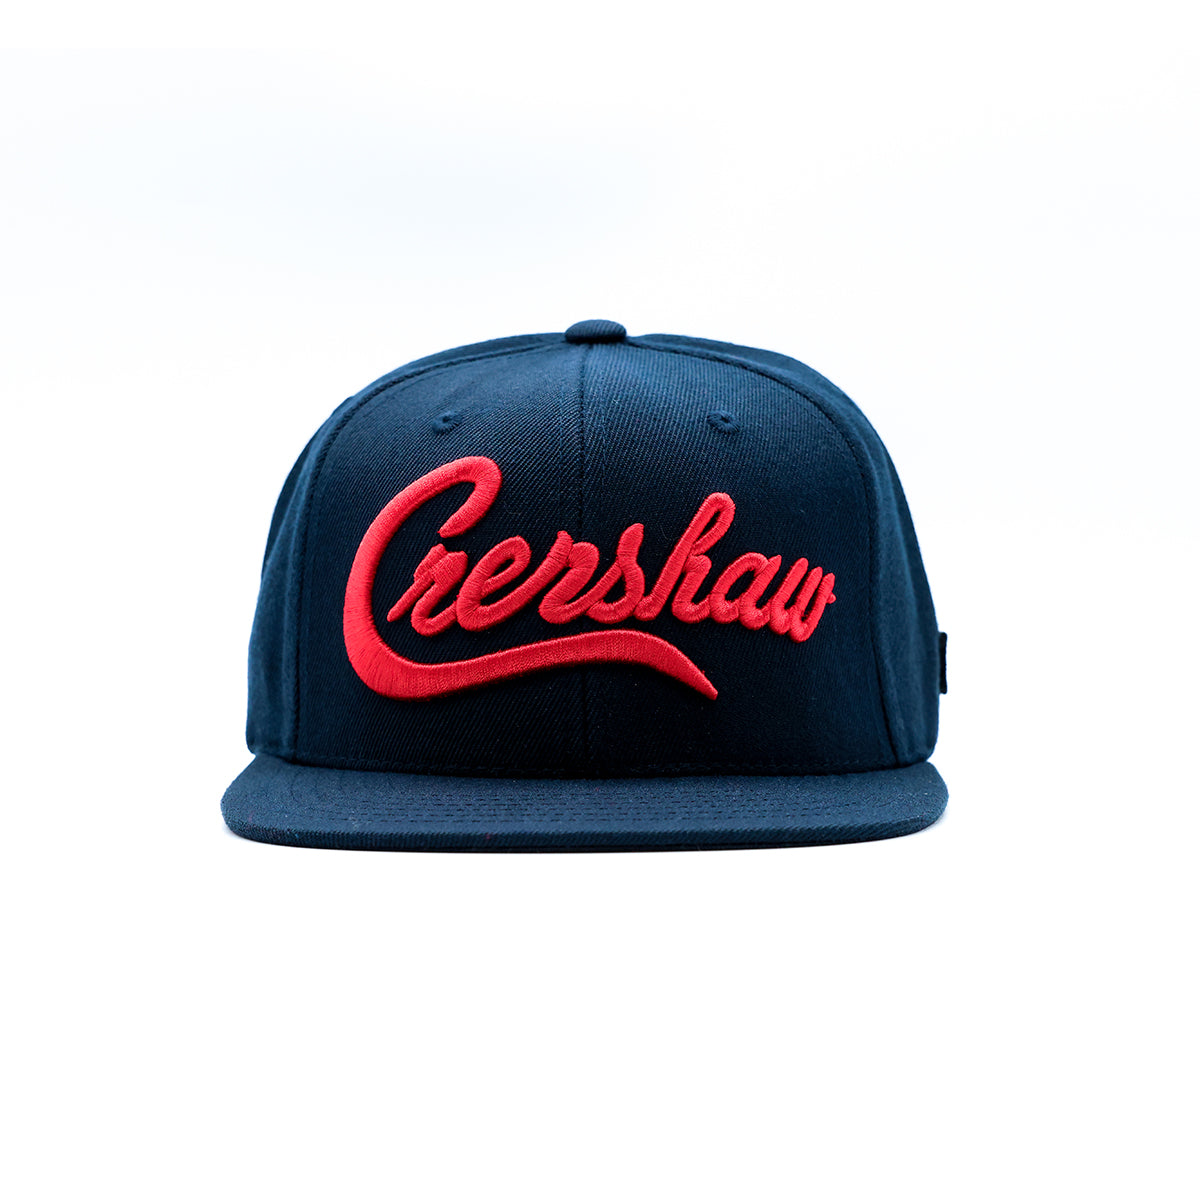 Crenshaw Limited Edition Snapback - Navy/Red - Front